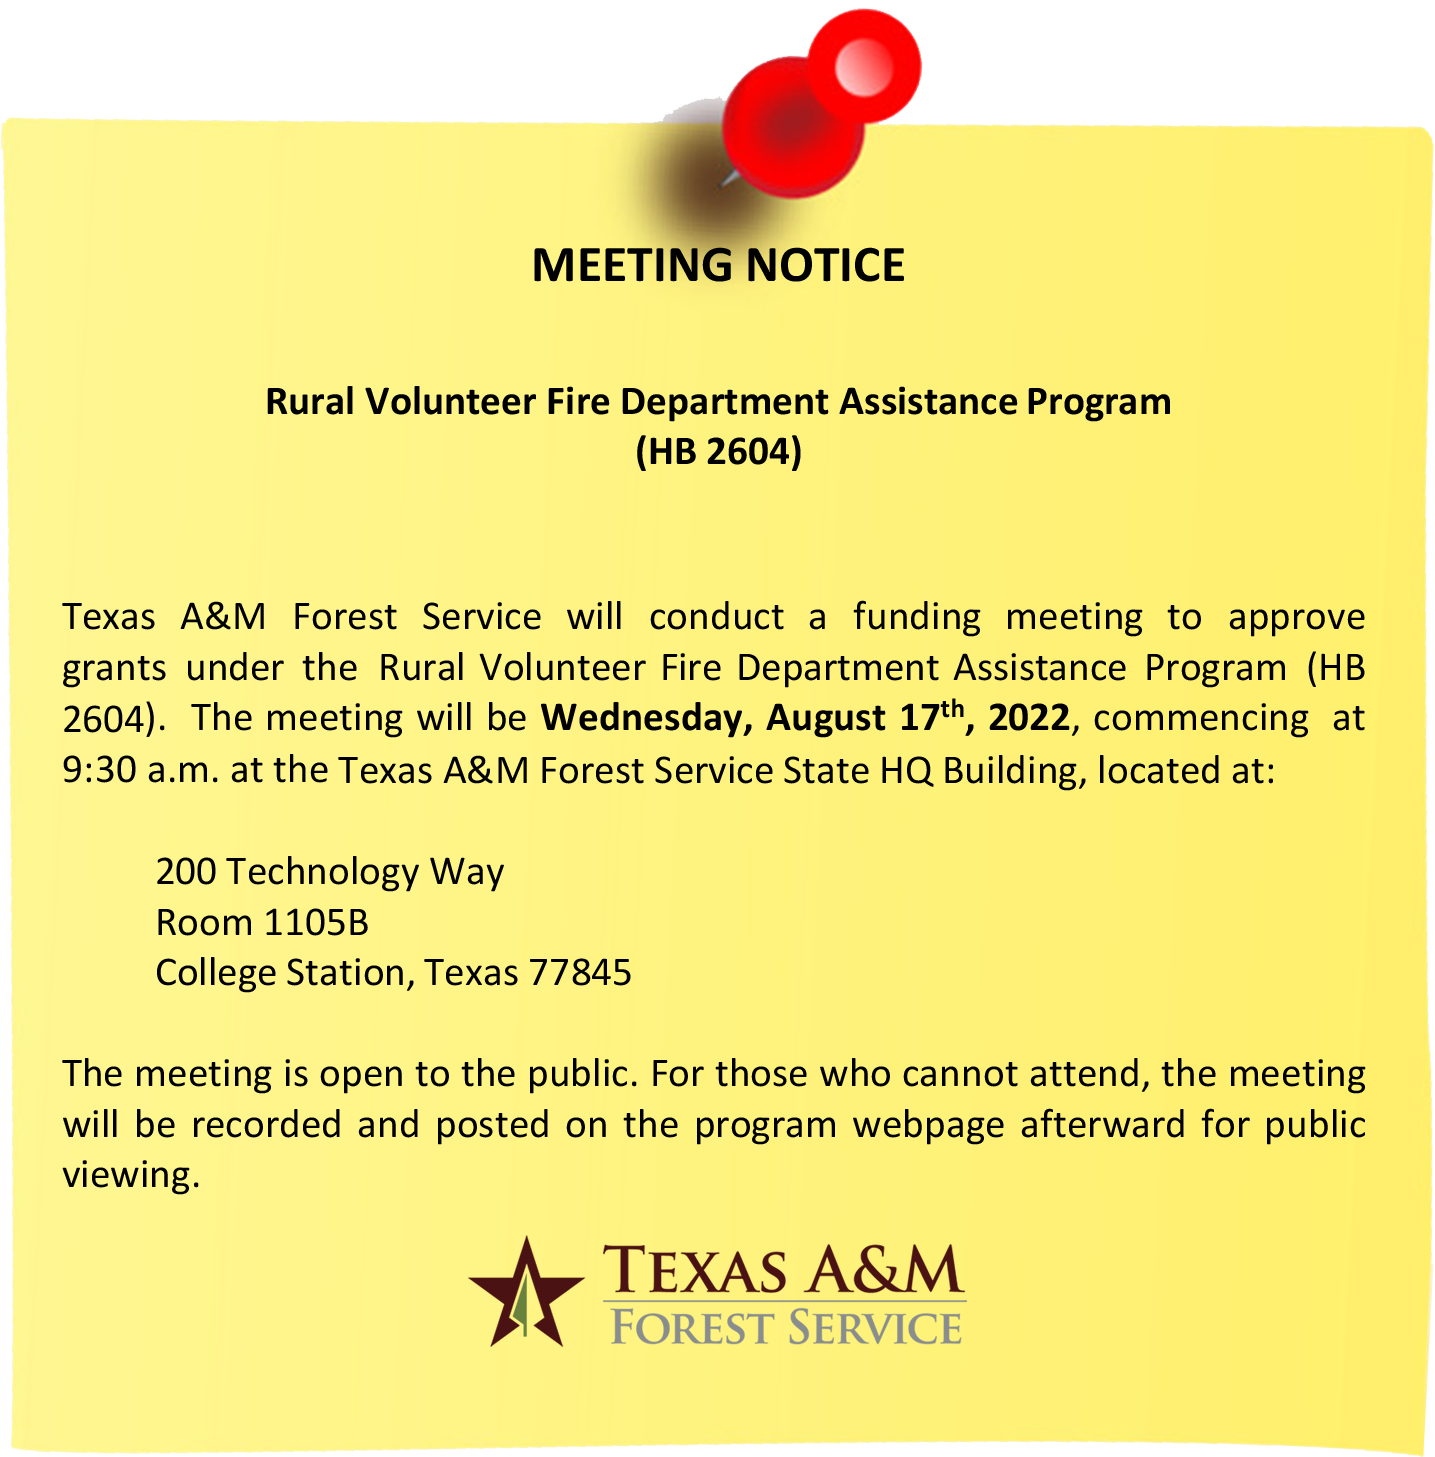 Funding Meeting Announcement Post It Note 8.17.22